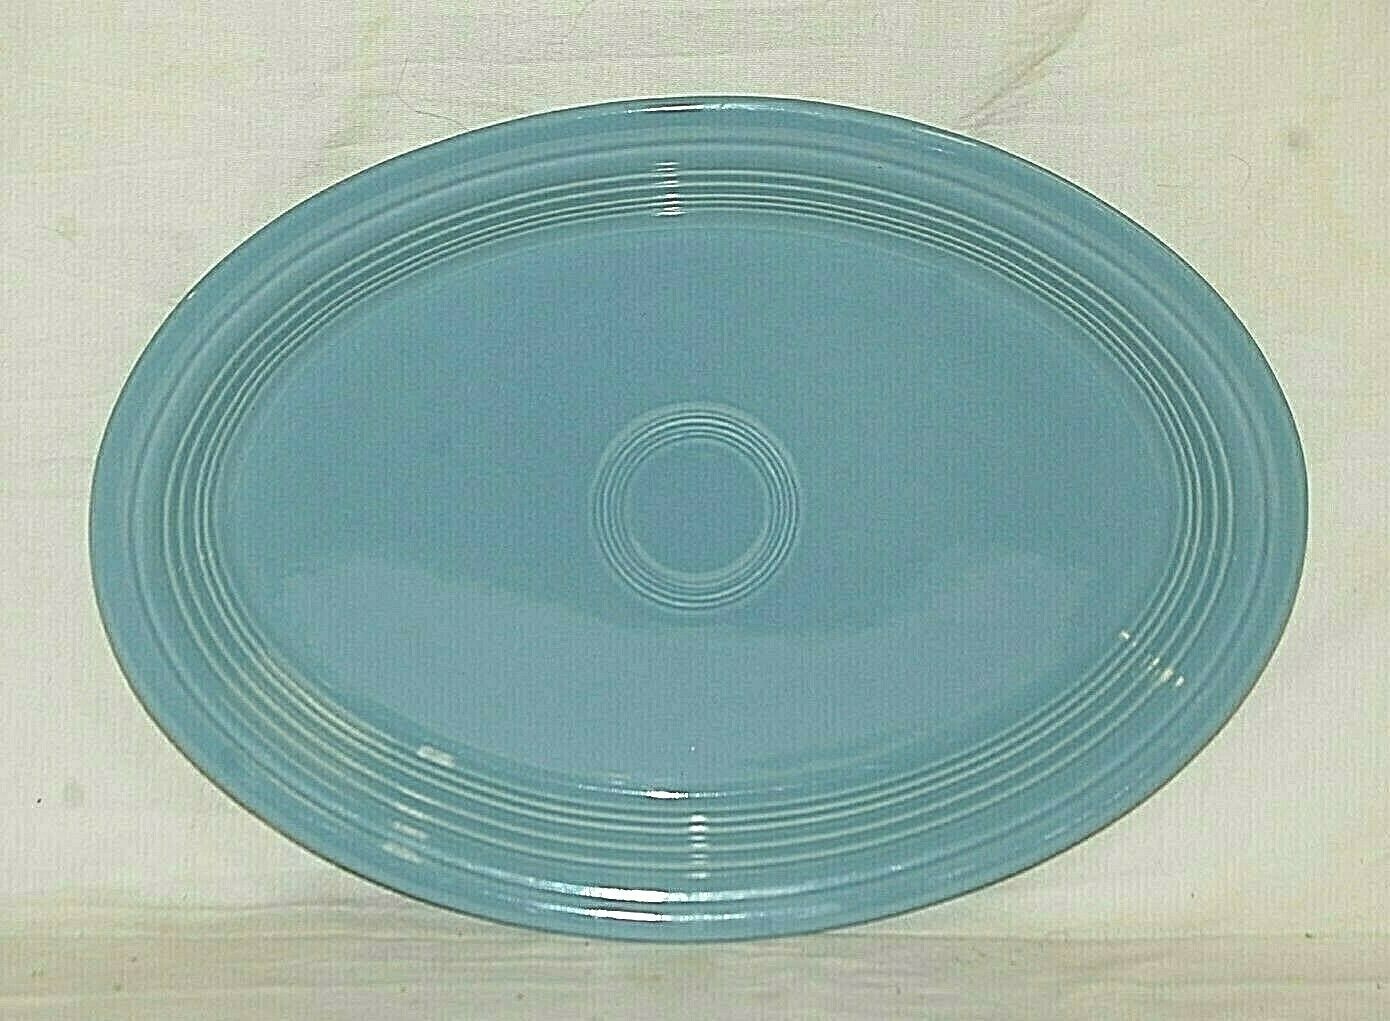 Primary image for Fiesta Periwinkle Blue by Homer Laughlin 13-5/8" Oval Serving Platter Dinnerware